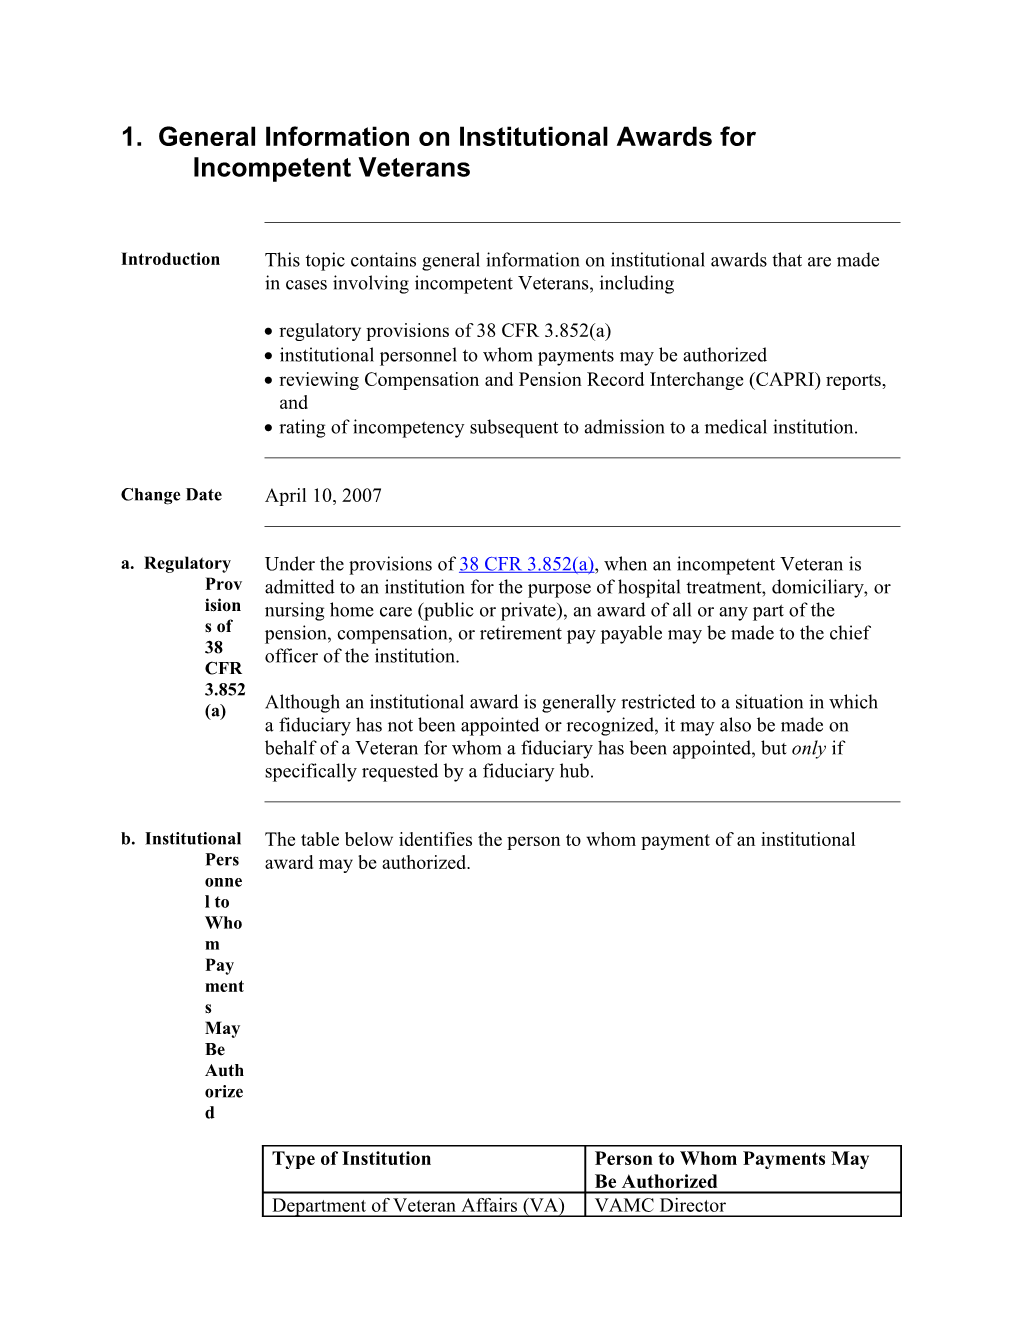 Section E Institutional Awards Specific to Incompetent Veterans (US Department of Veterans